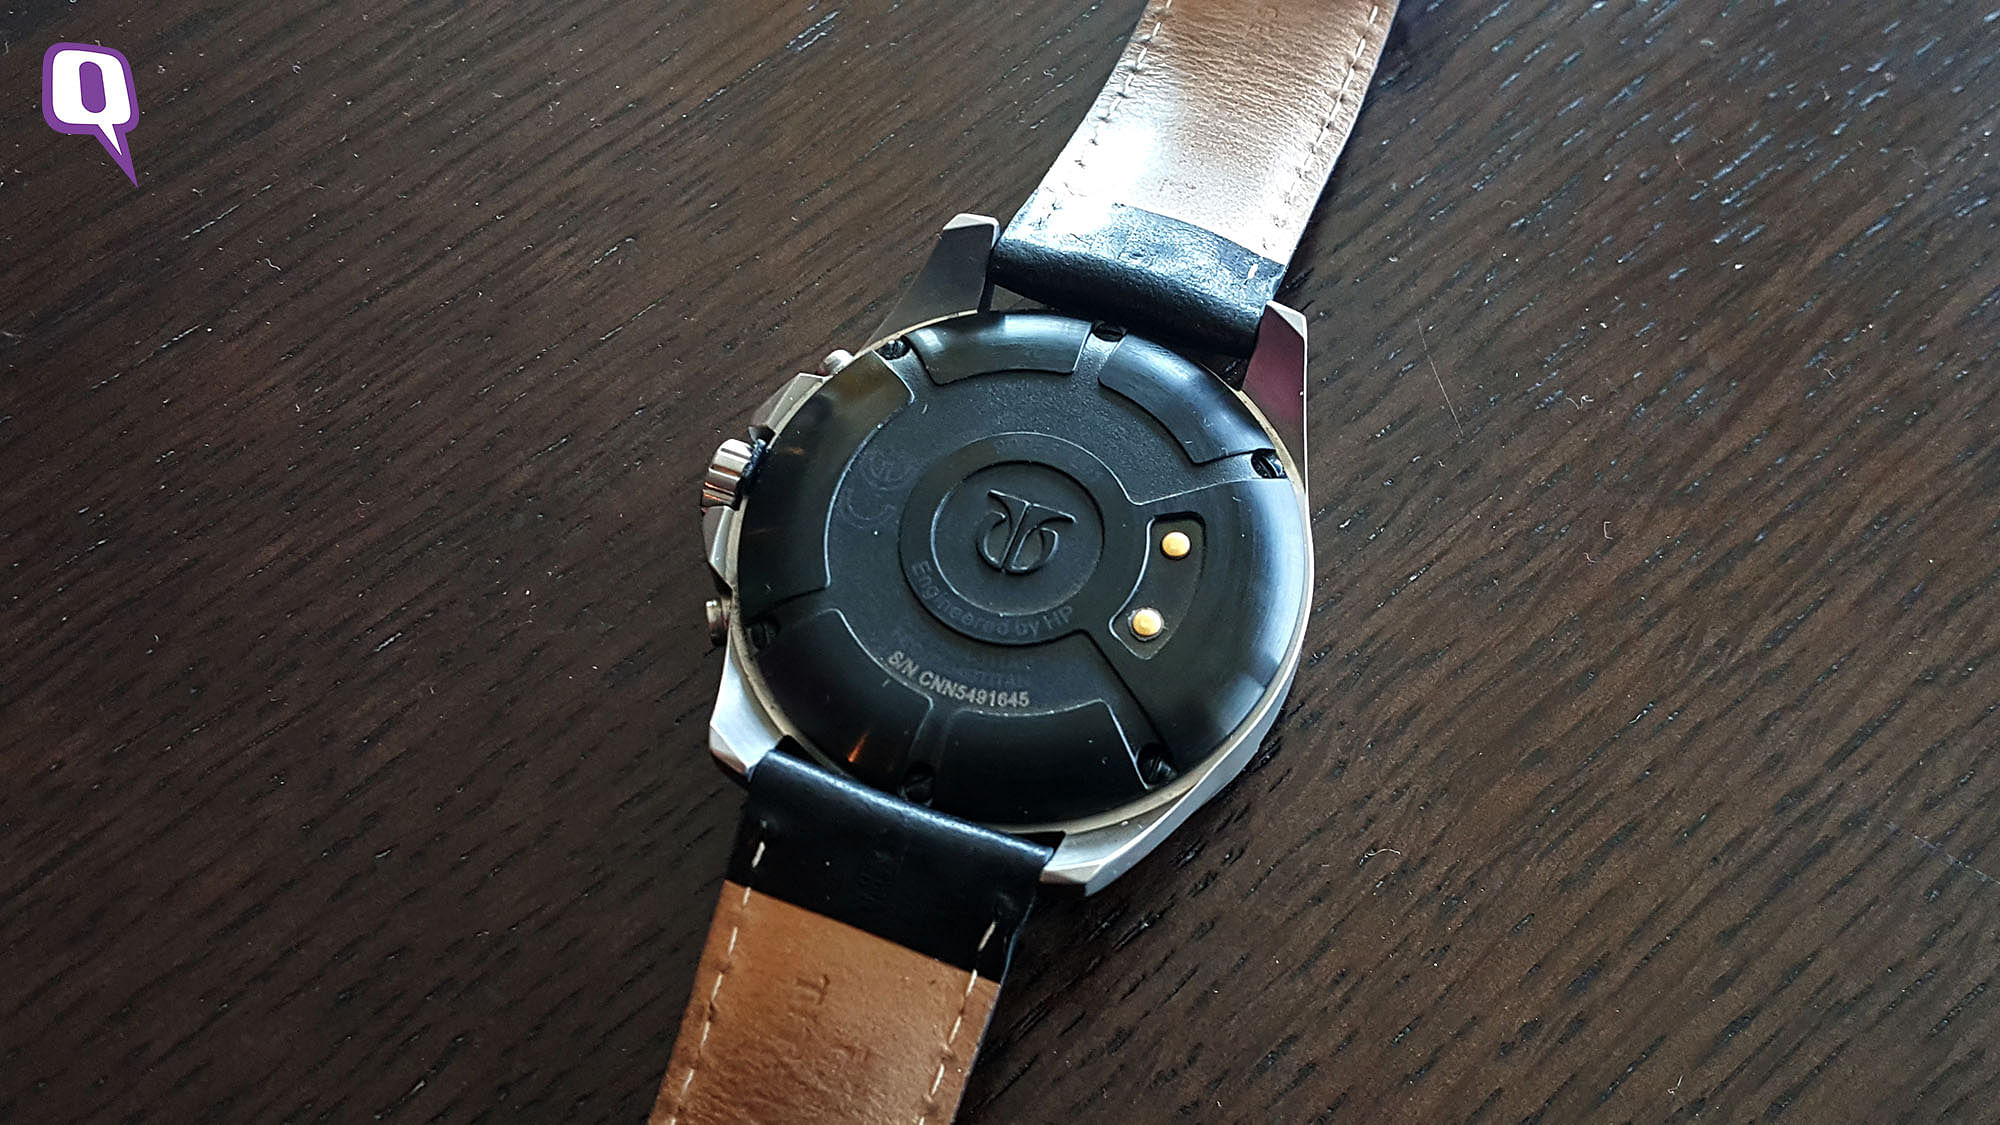 Review: Titan Juxt Is Just a Smart Analog Watch With OLED Display